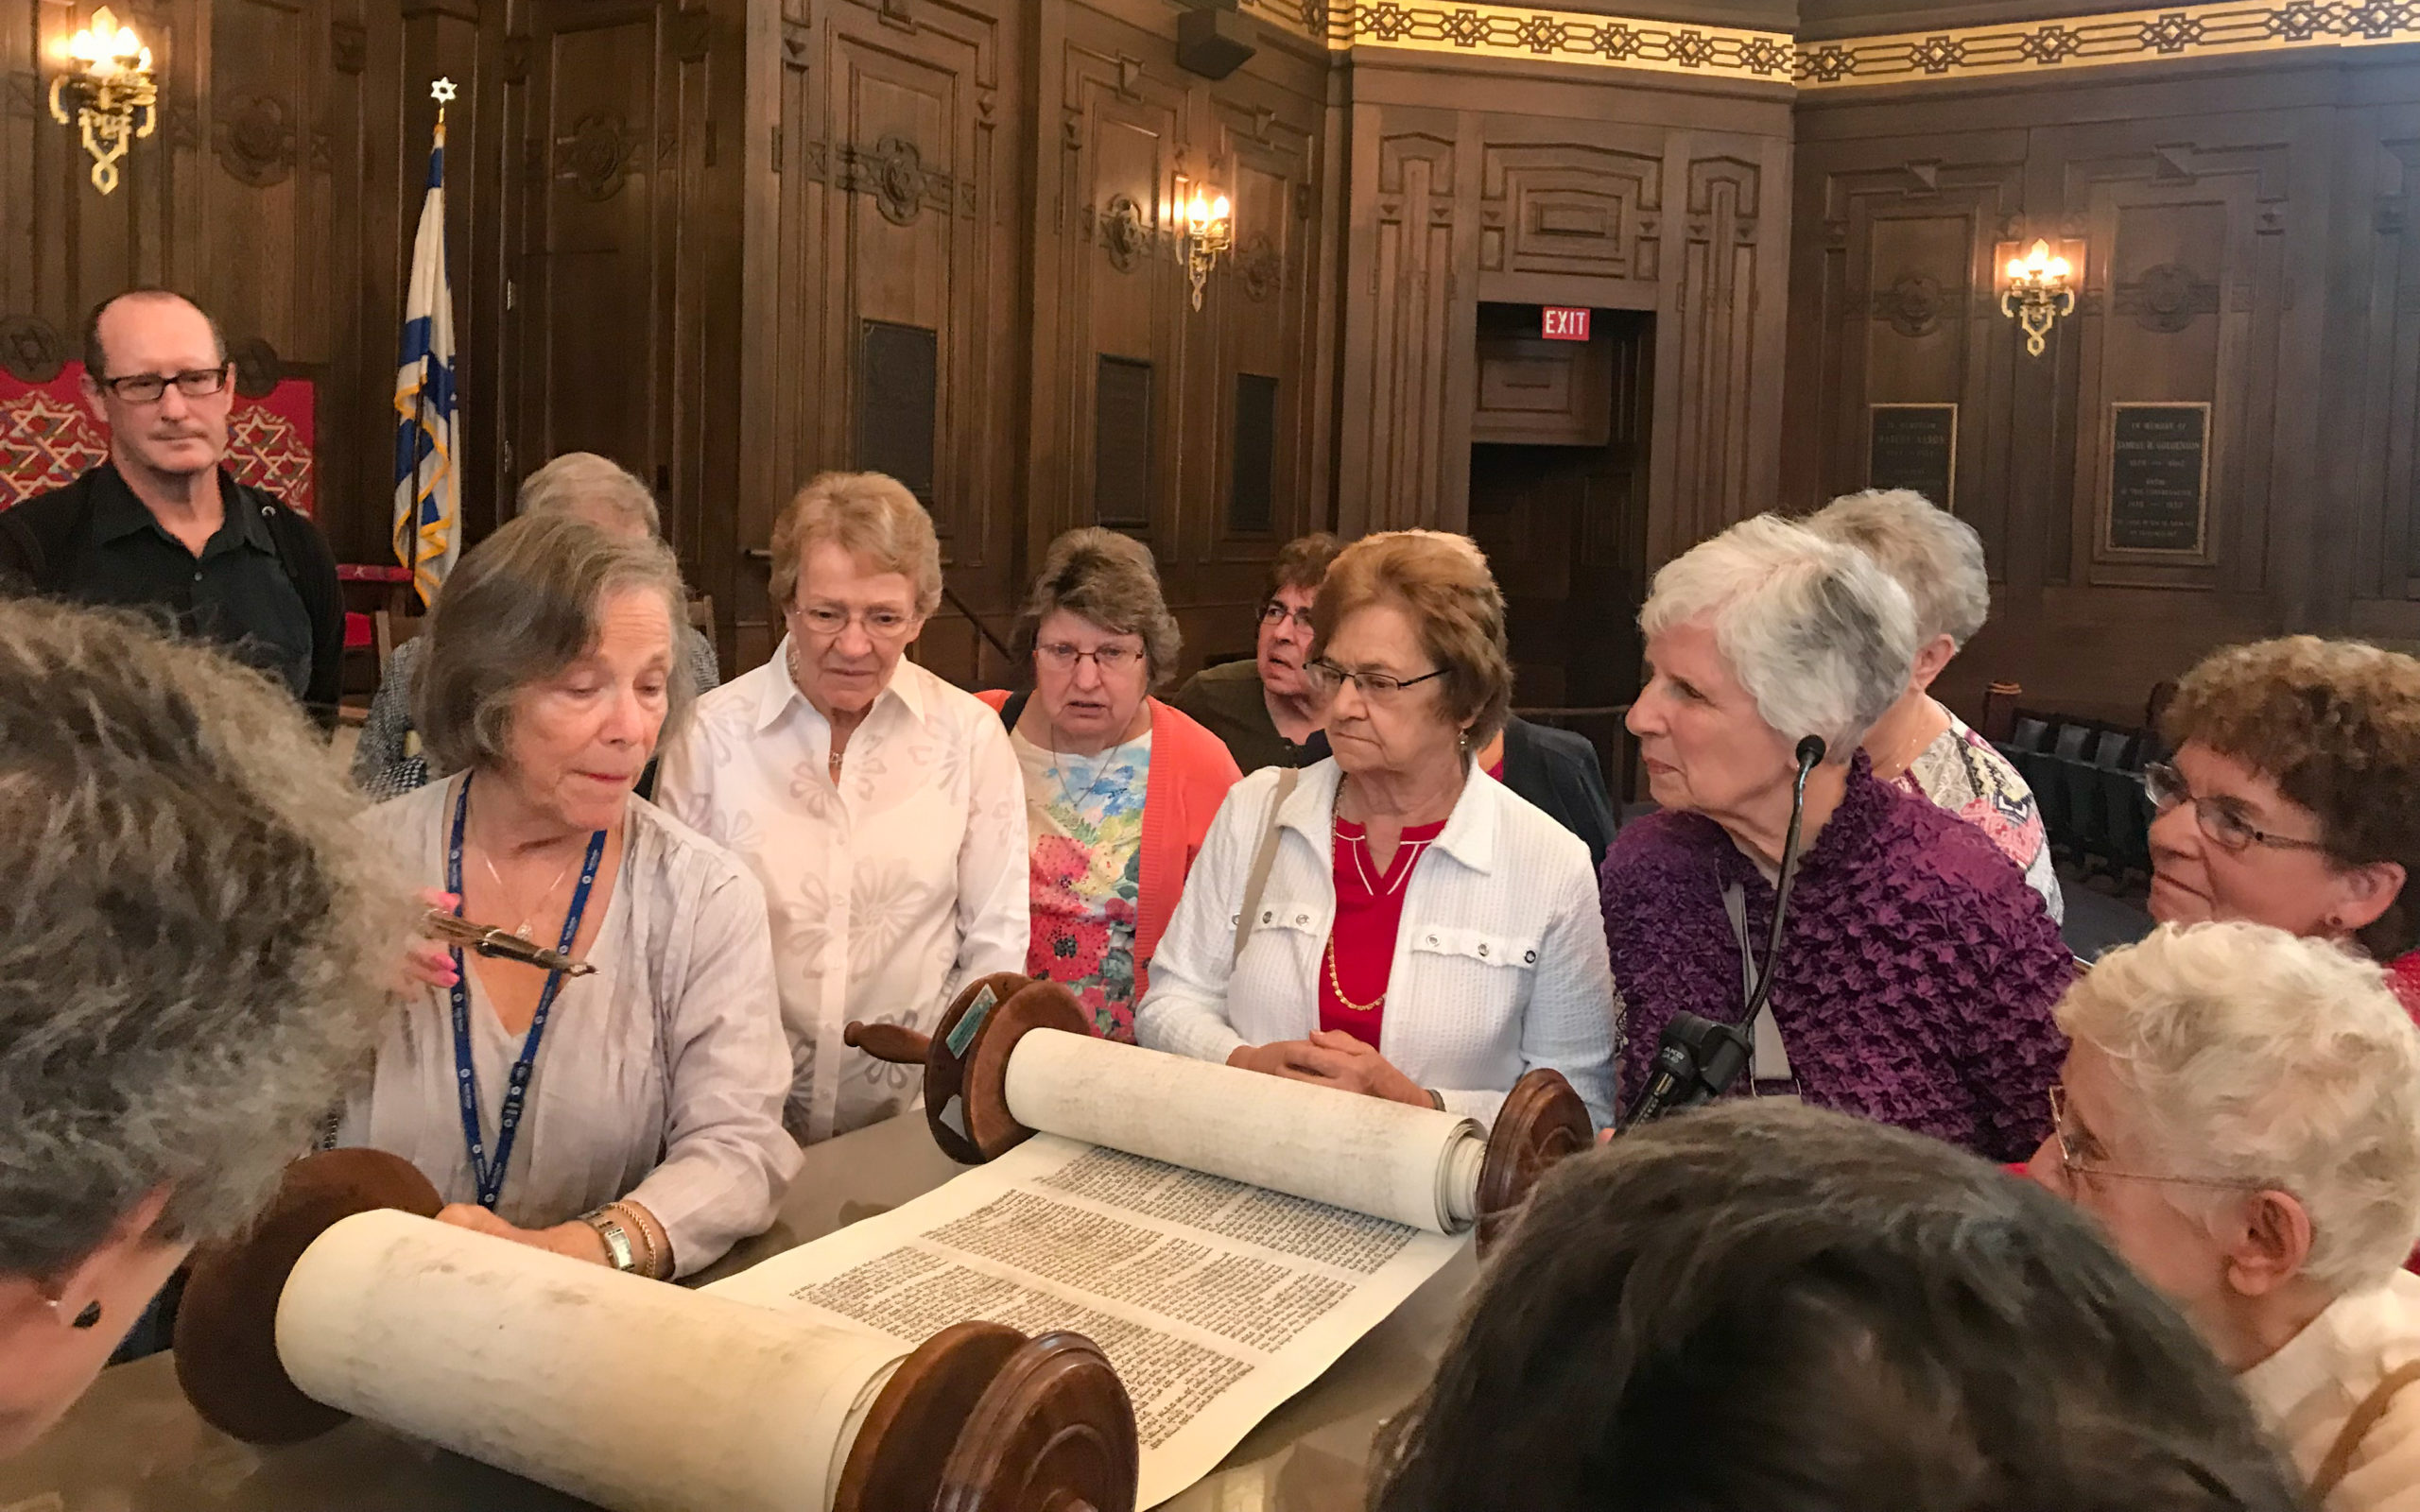 Tour group view sacred Torah at Rodef Shalom's synagogue in Oakland.